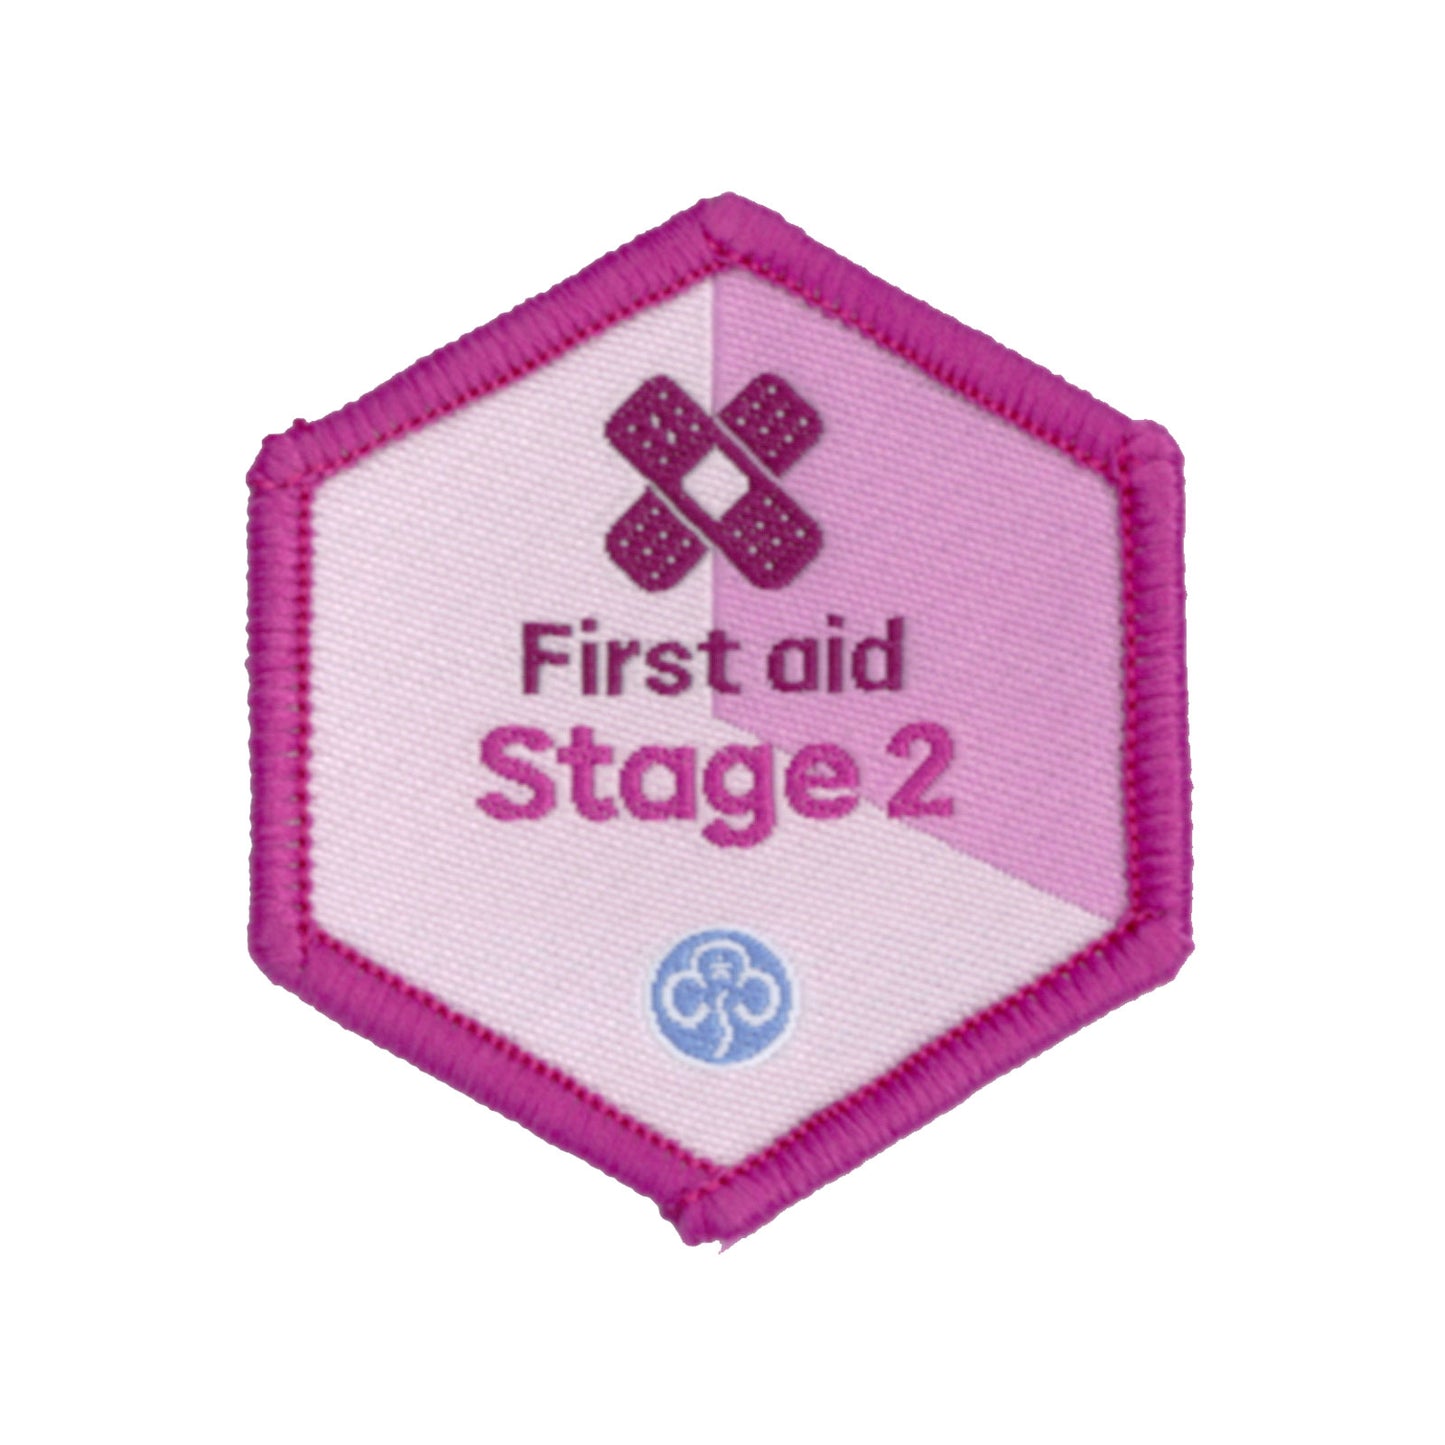 Skills Builder - Be Well - First Aid Stage 2 Woven Badge